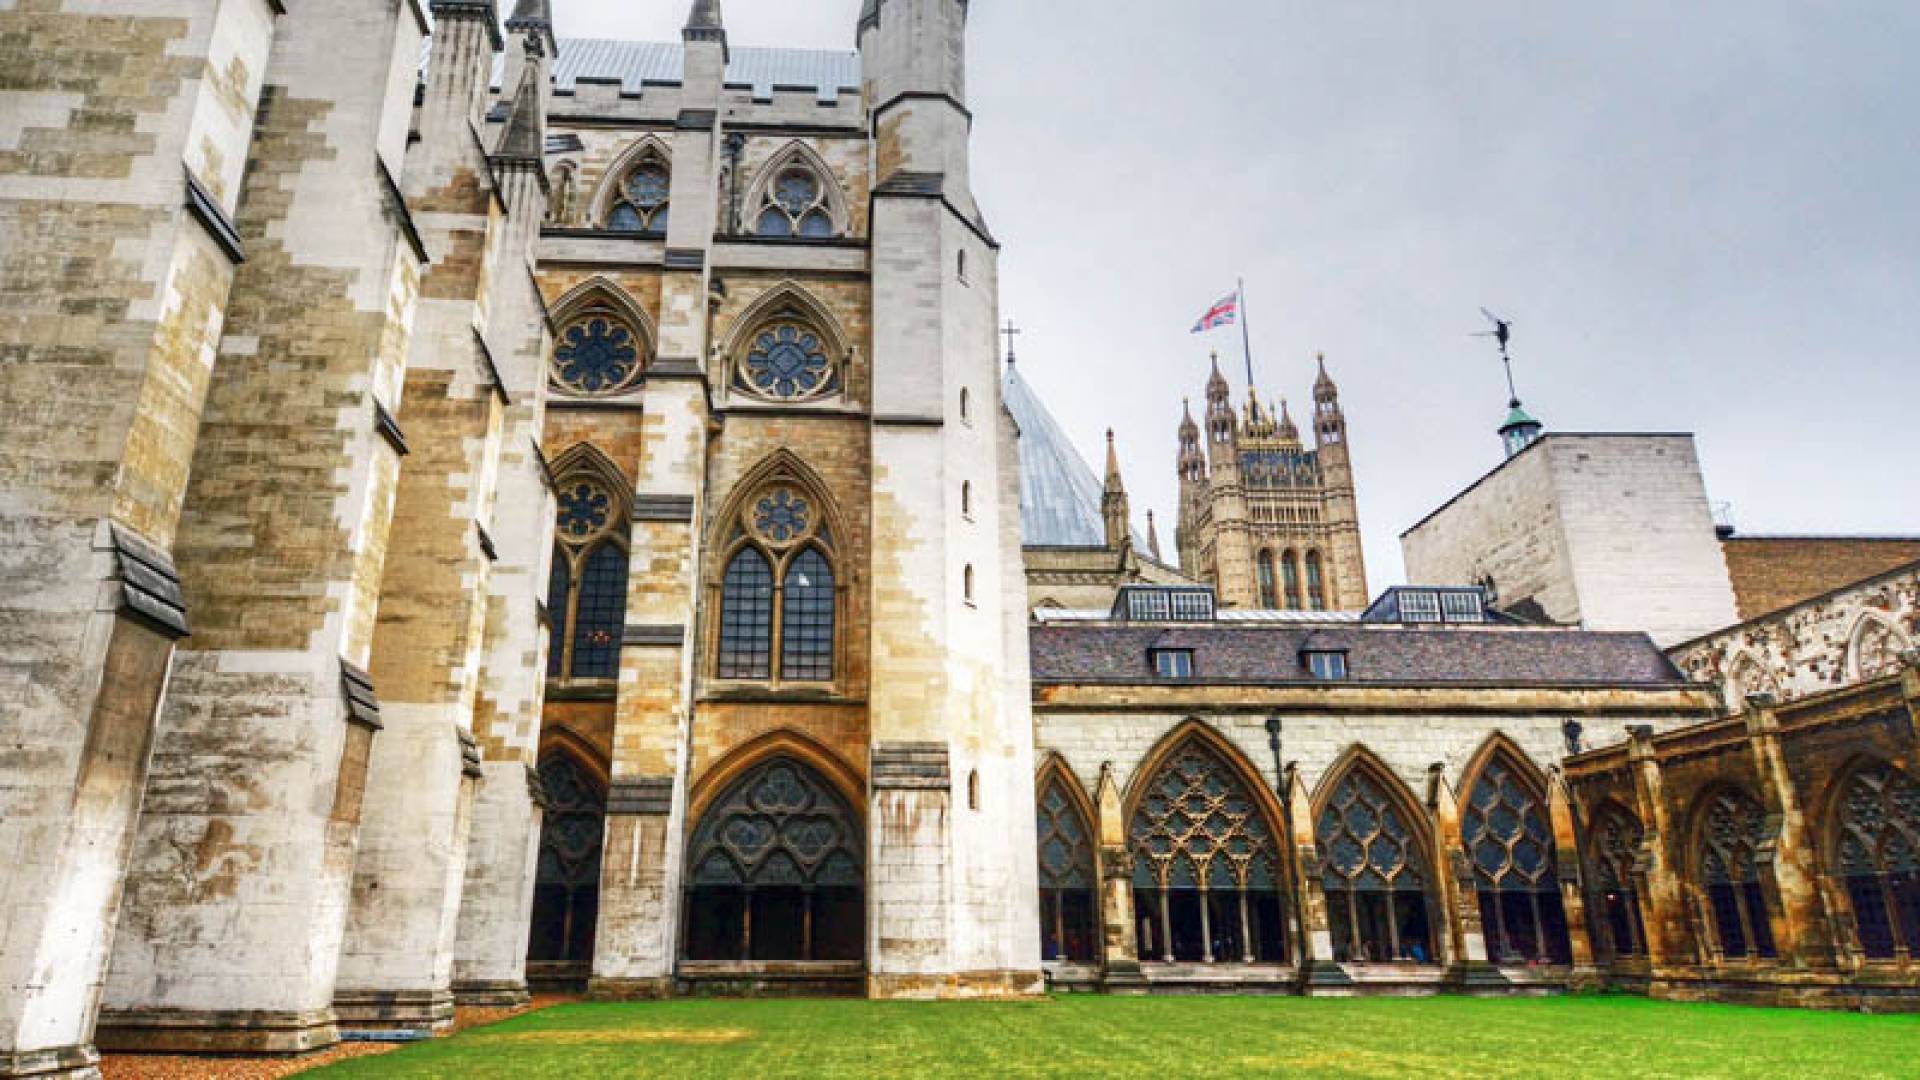 WESTMINSTER ABBEY, Convent